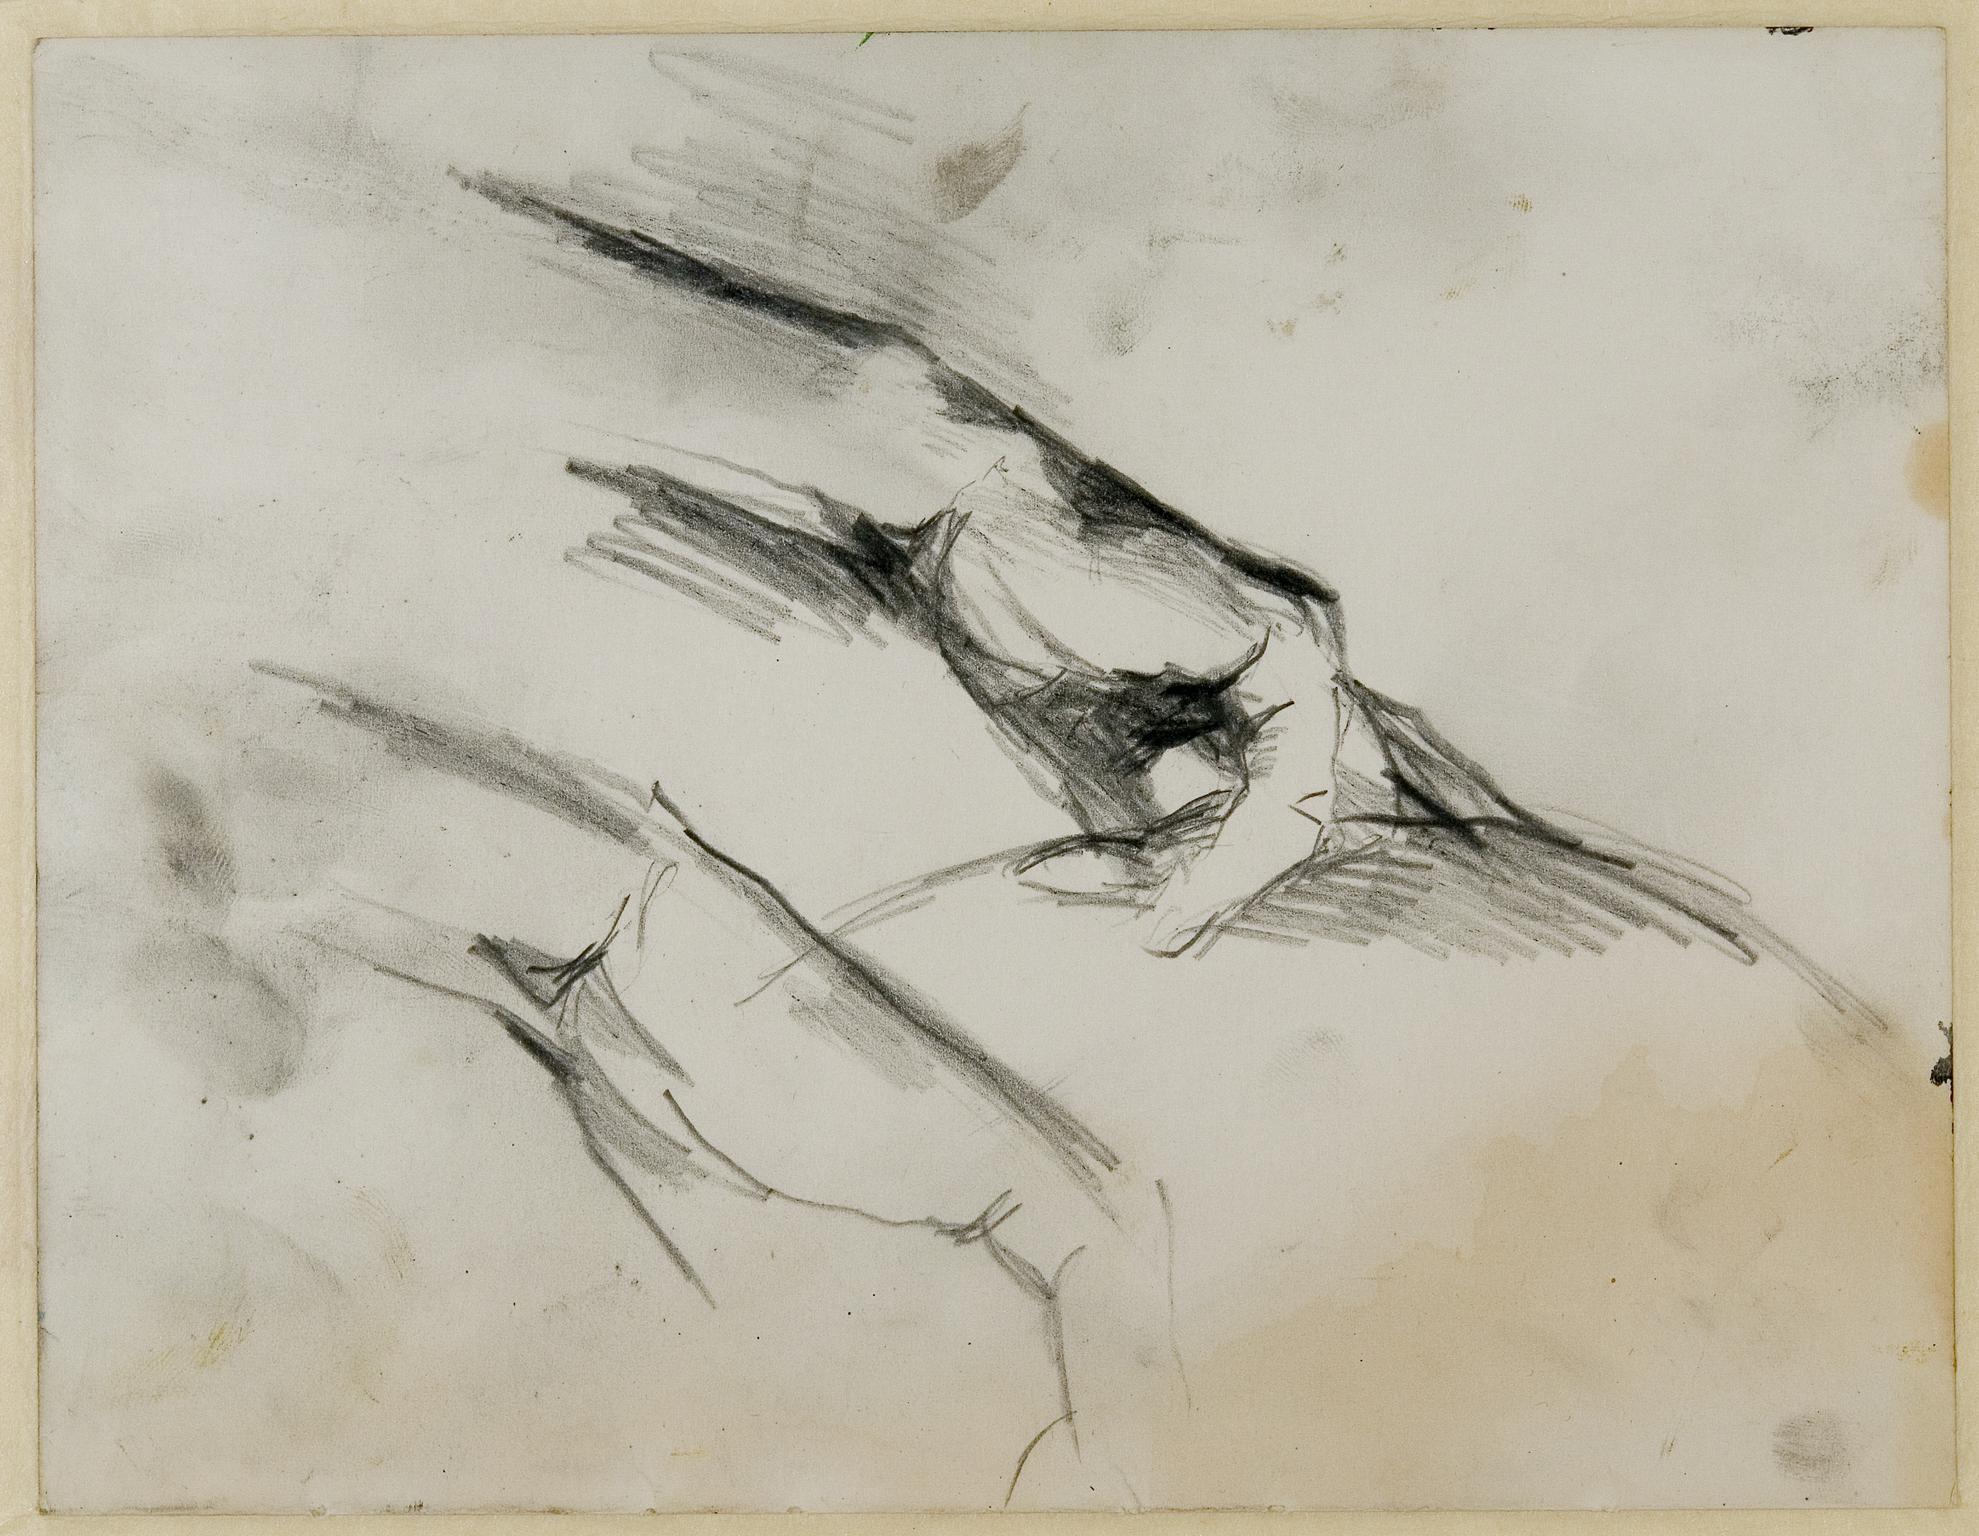 Two studies of hand and arm